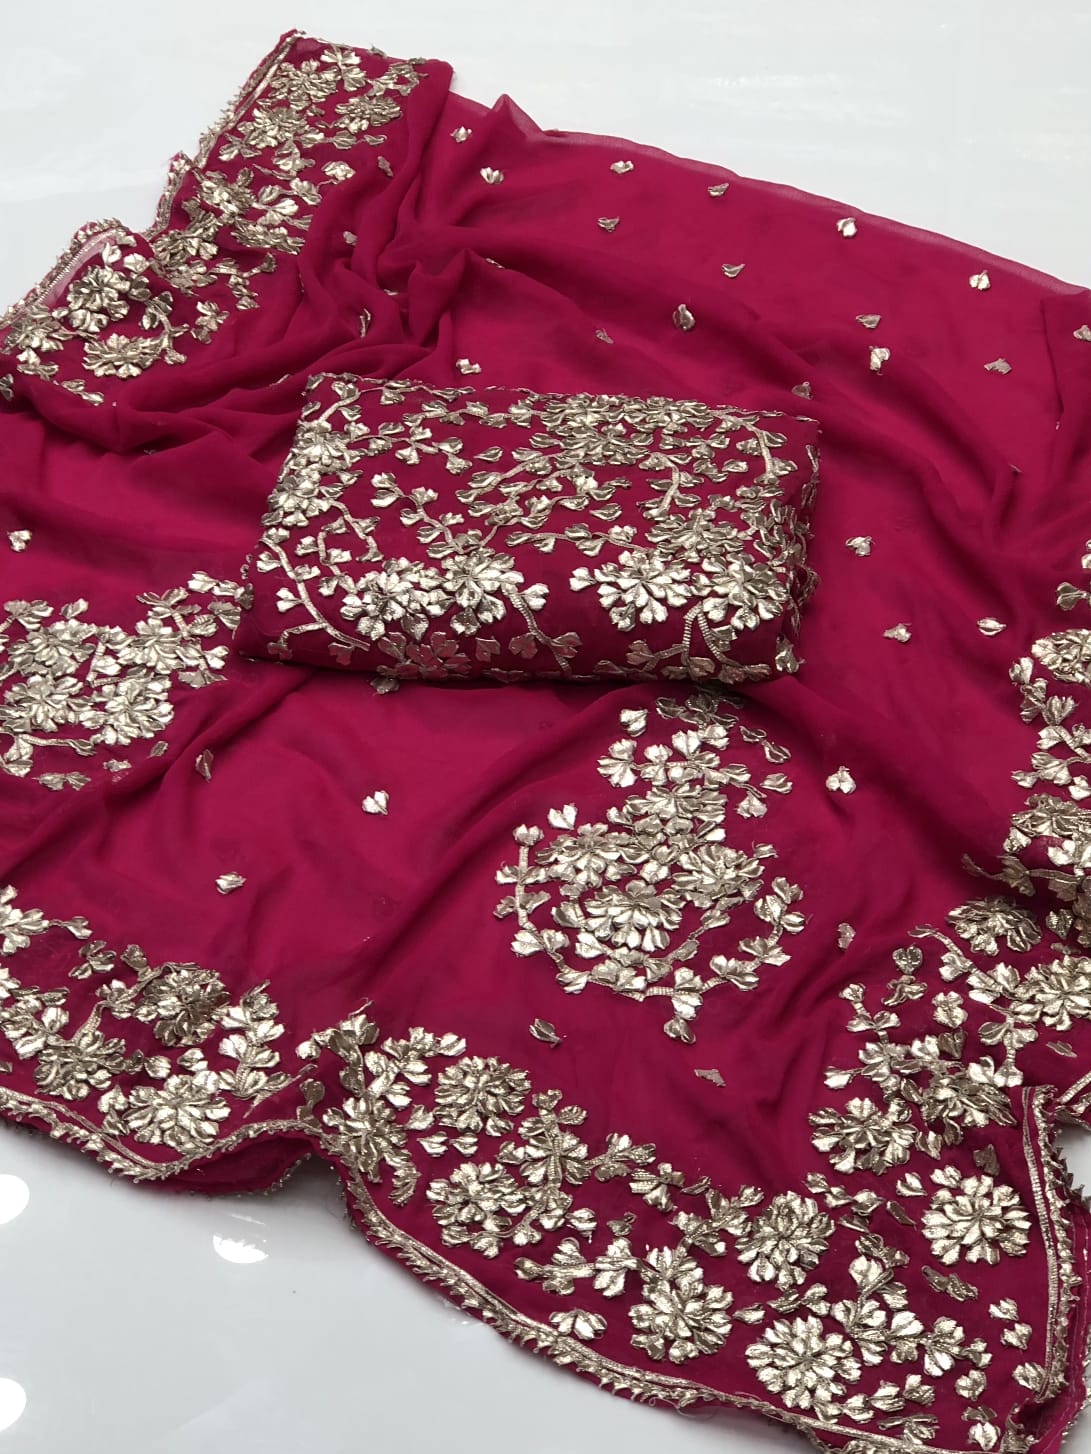 Gotta Collection 🔥 

Handmade lcd gotta work on soft krinkle shifoon full shirt jall with 4 sided border inside bunches dupatta 2pc suit...